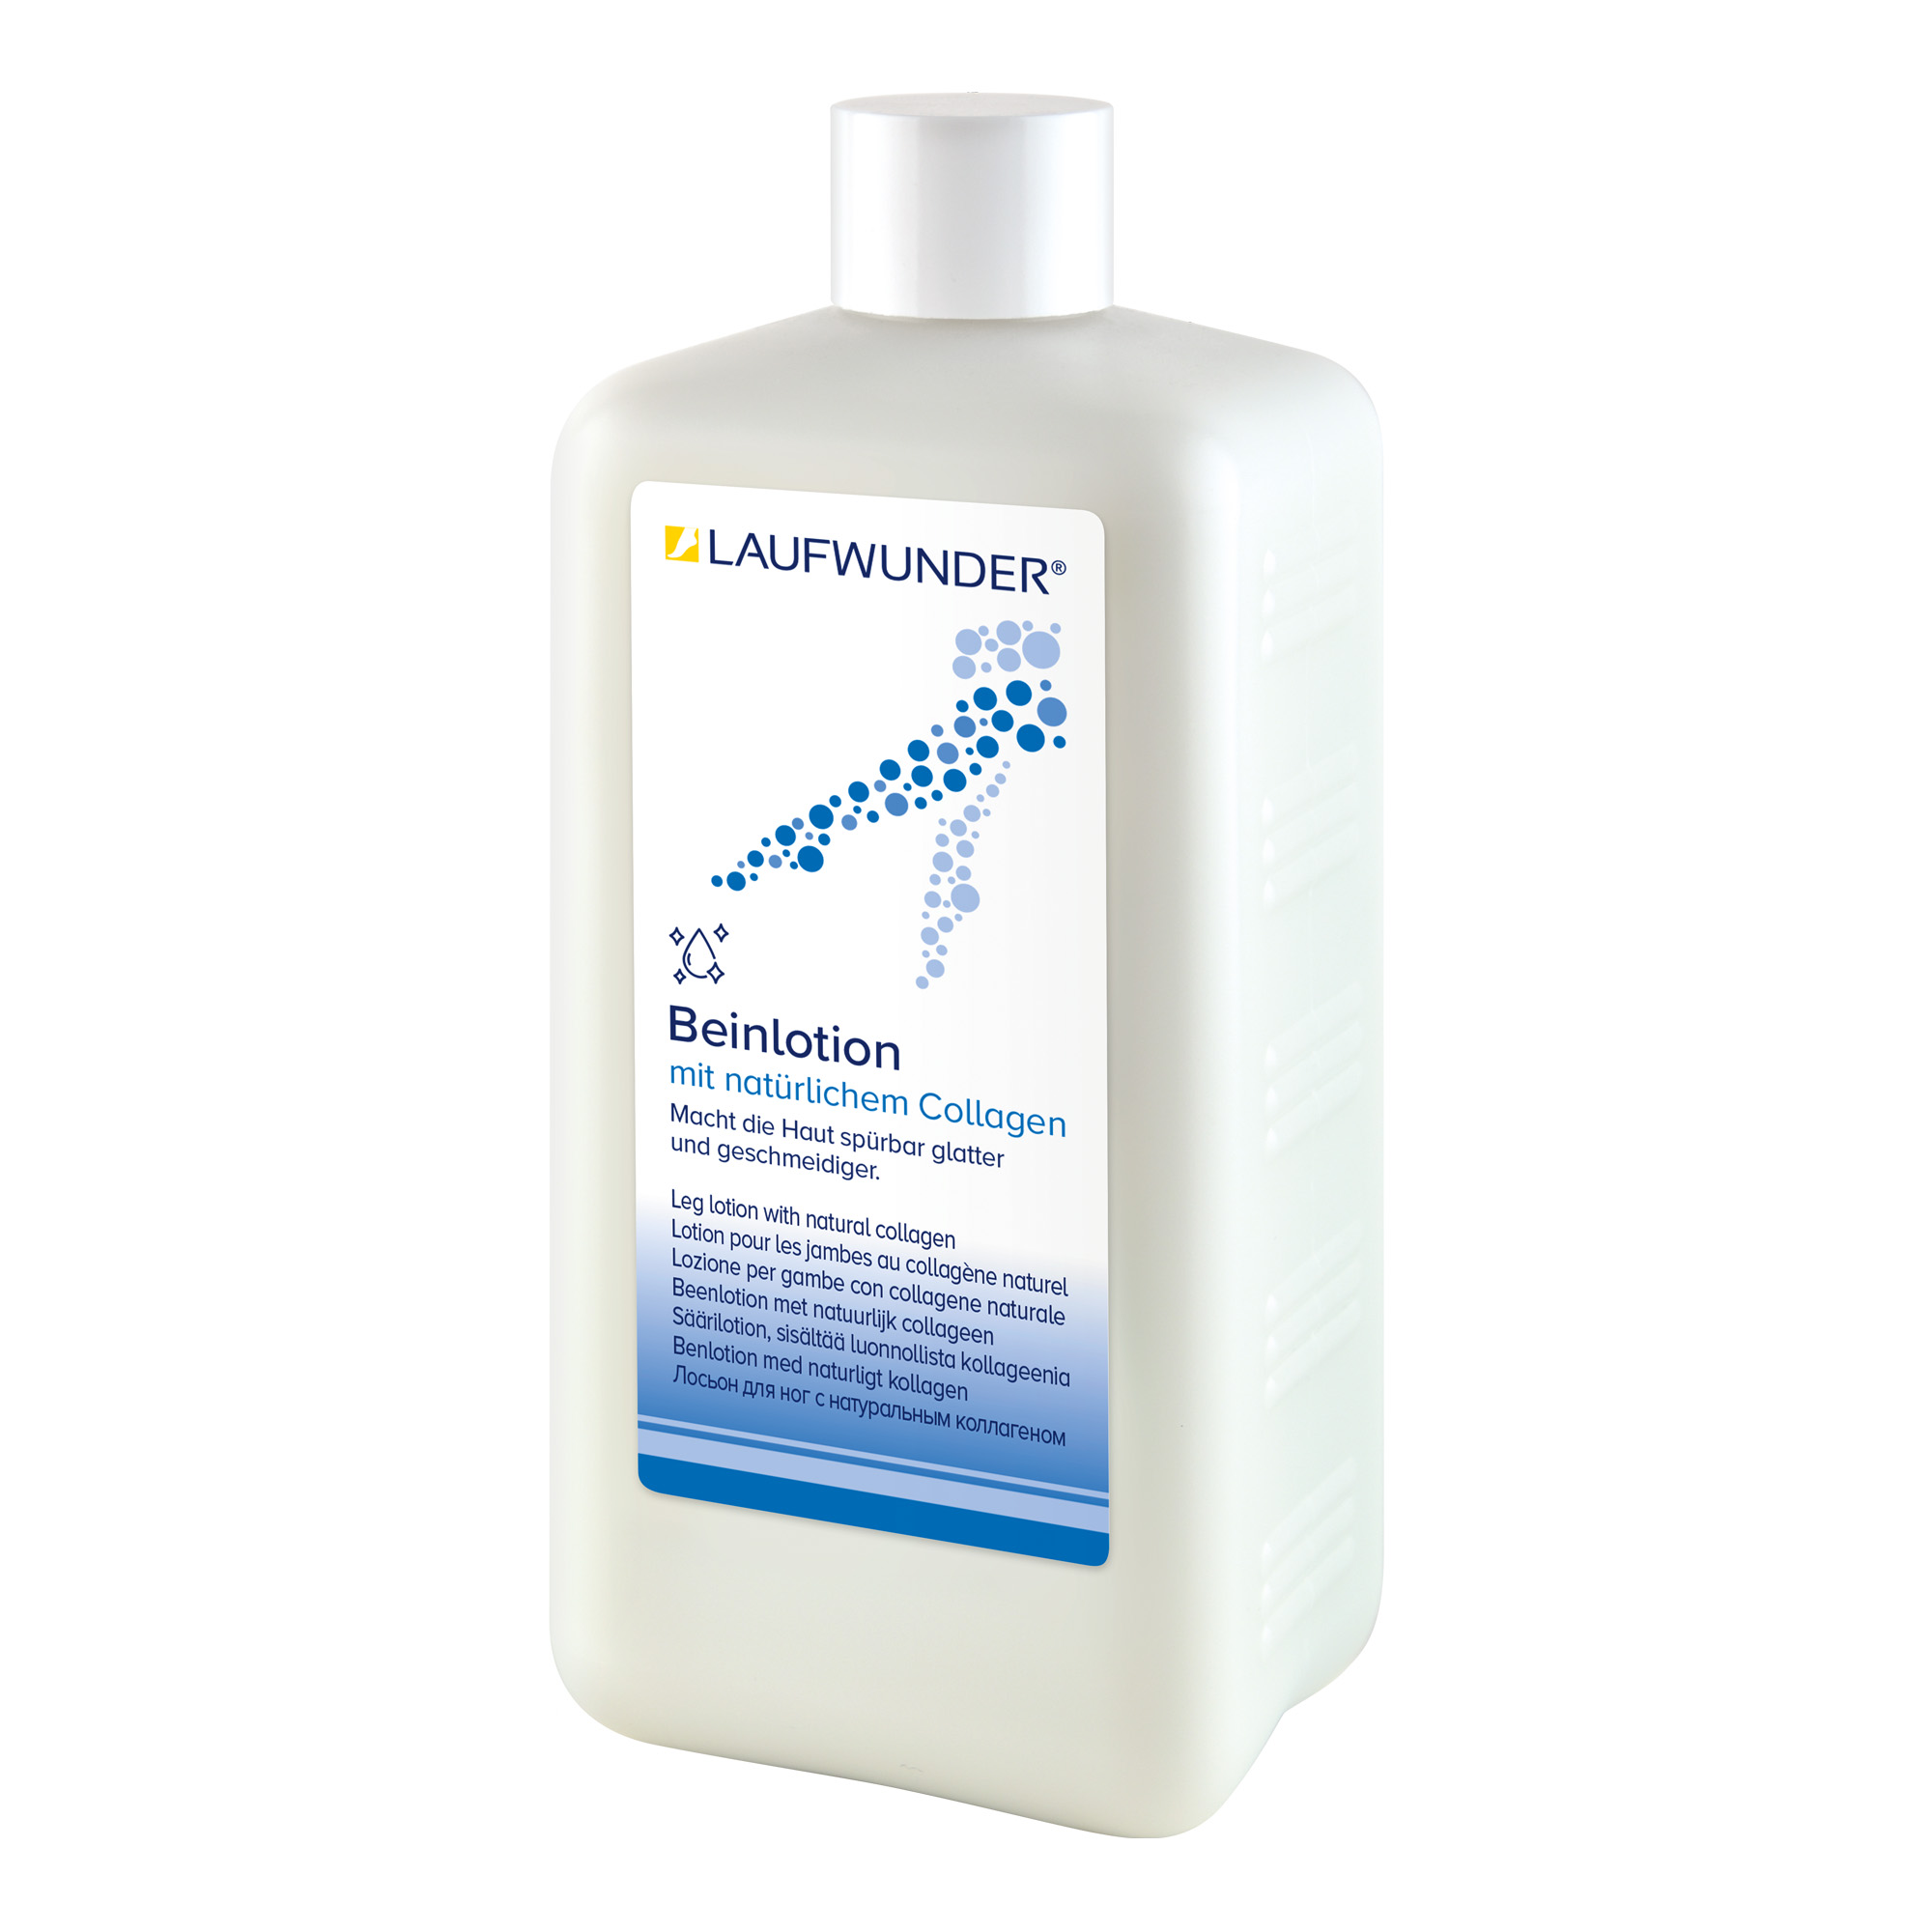 Moisturising leg lotion for dry and dehydrated skin 500 ml